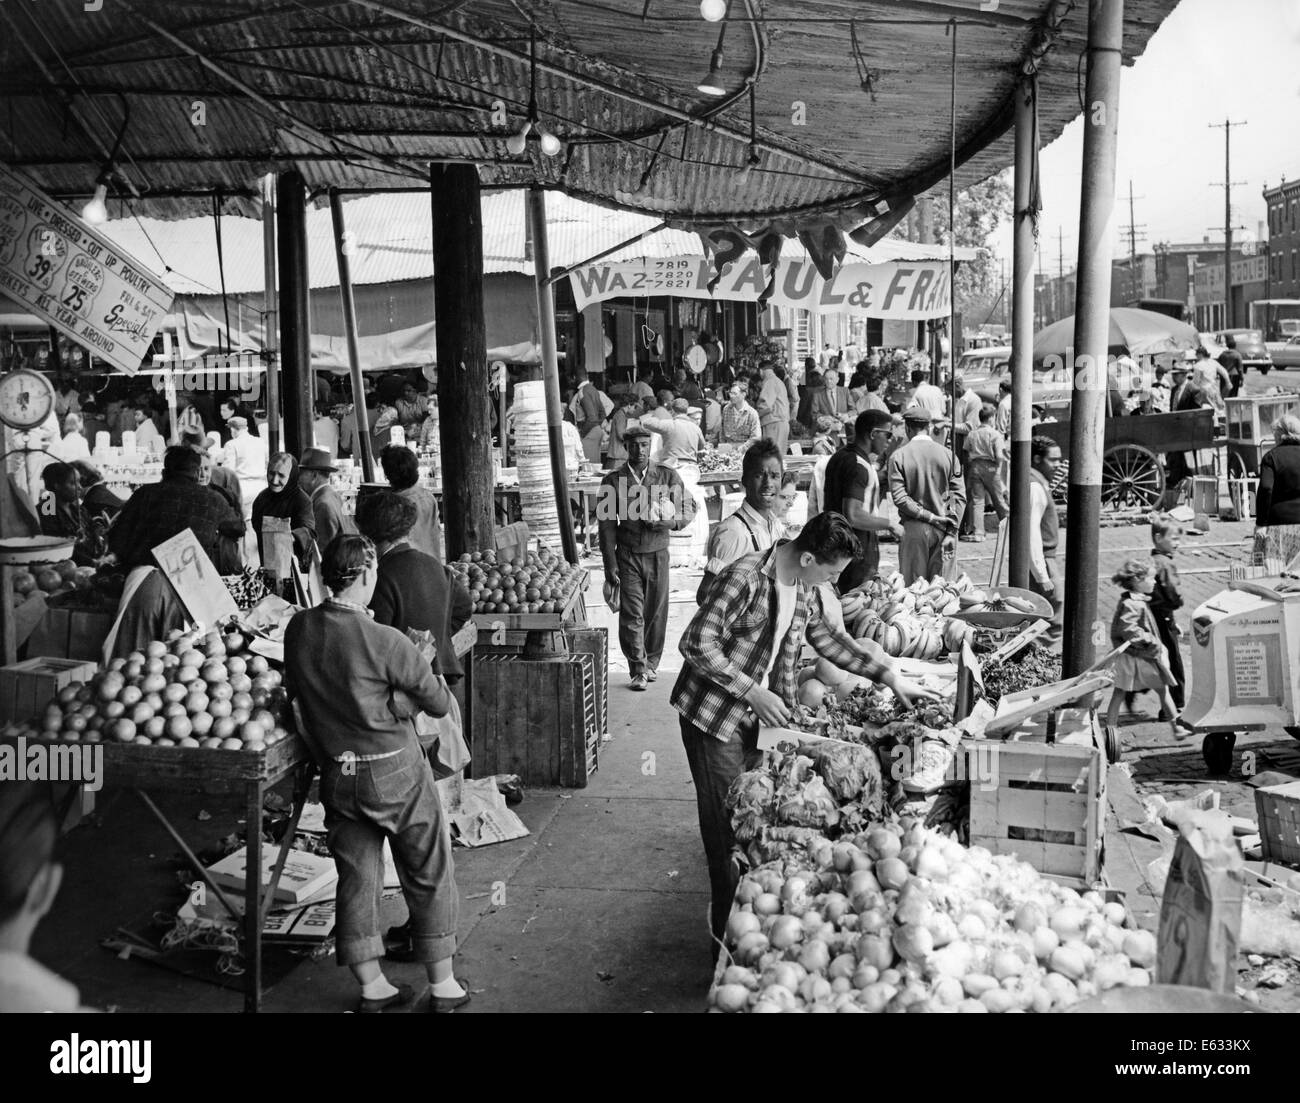 1950s 1960s PEOPLE SHOPPING FOR PRODUCE AT URBAN OUTDOOR FOOD MARKET PHILADELPHIA PA USA Stock Photo